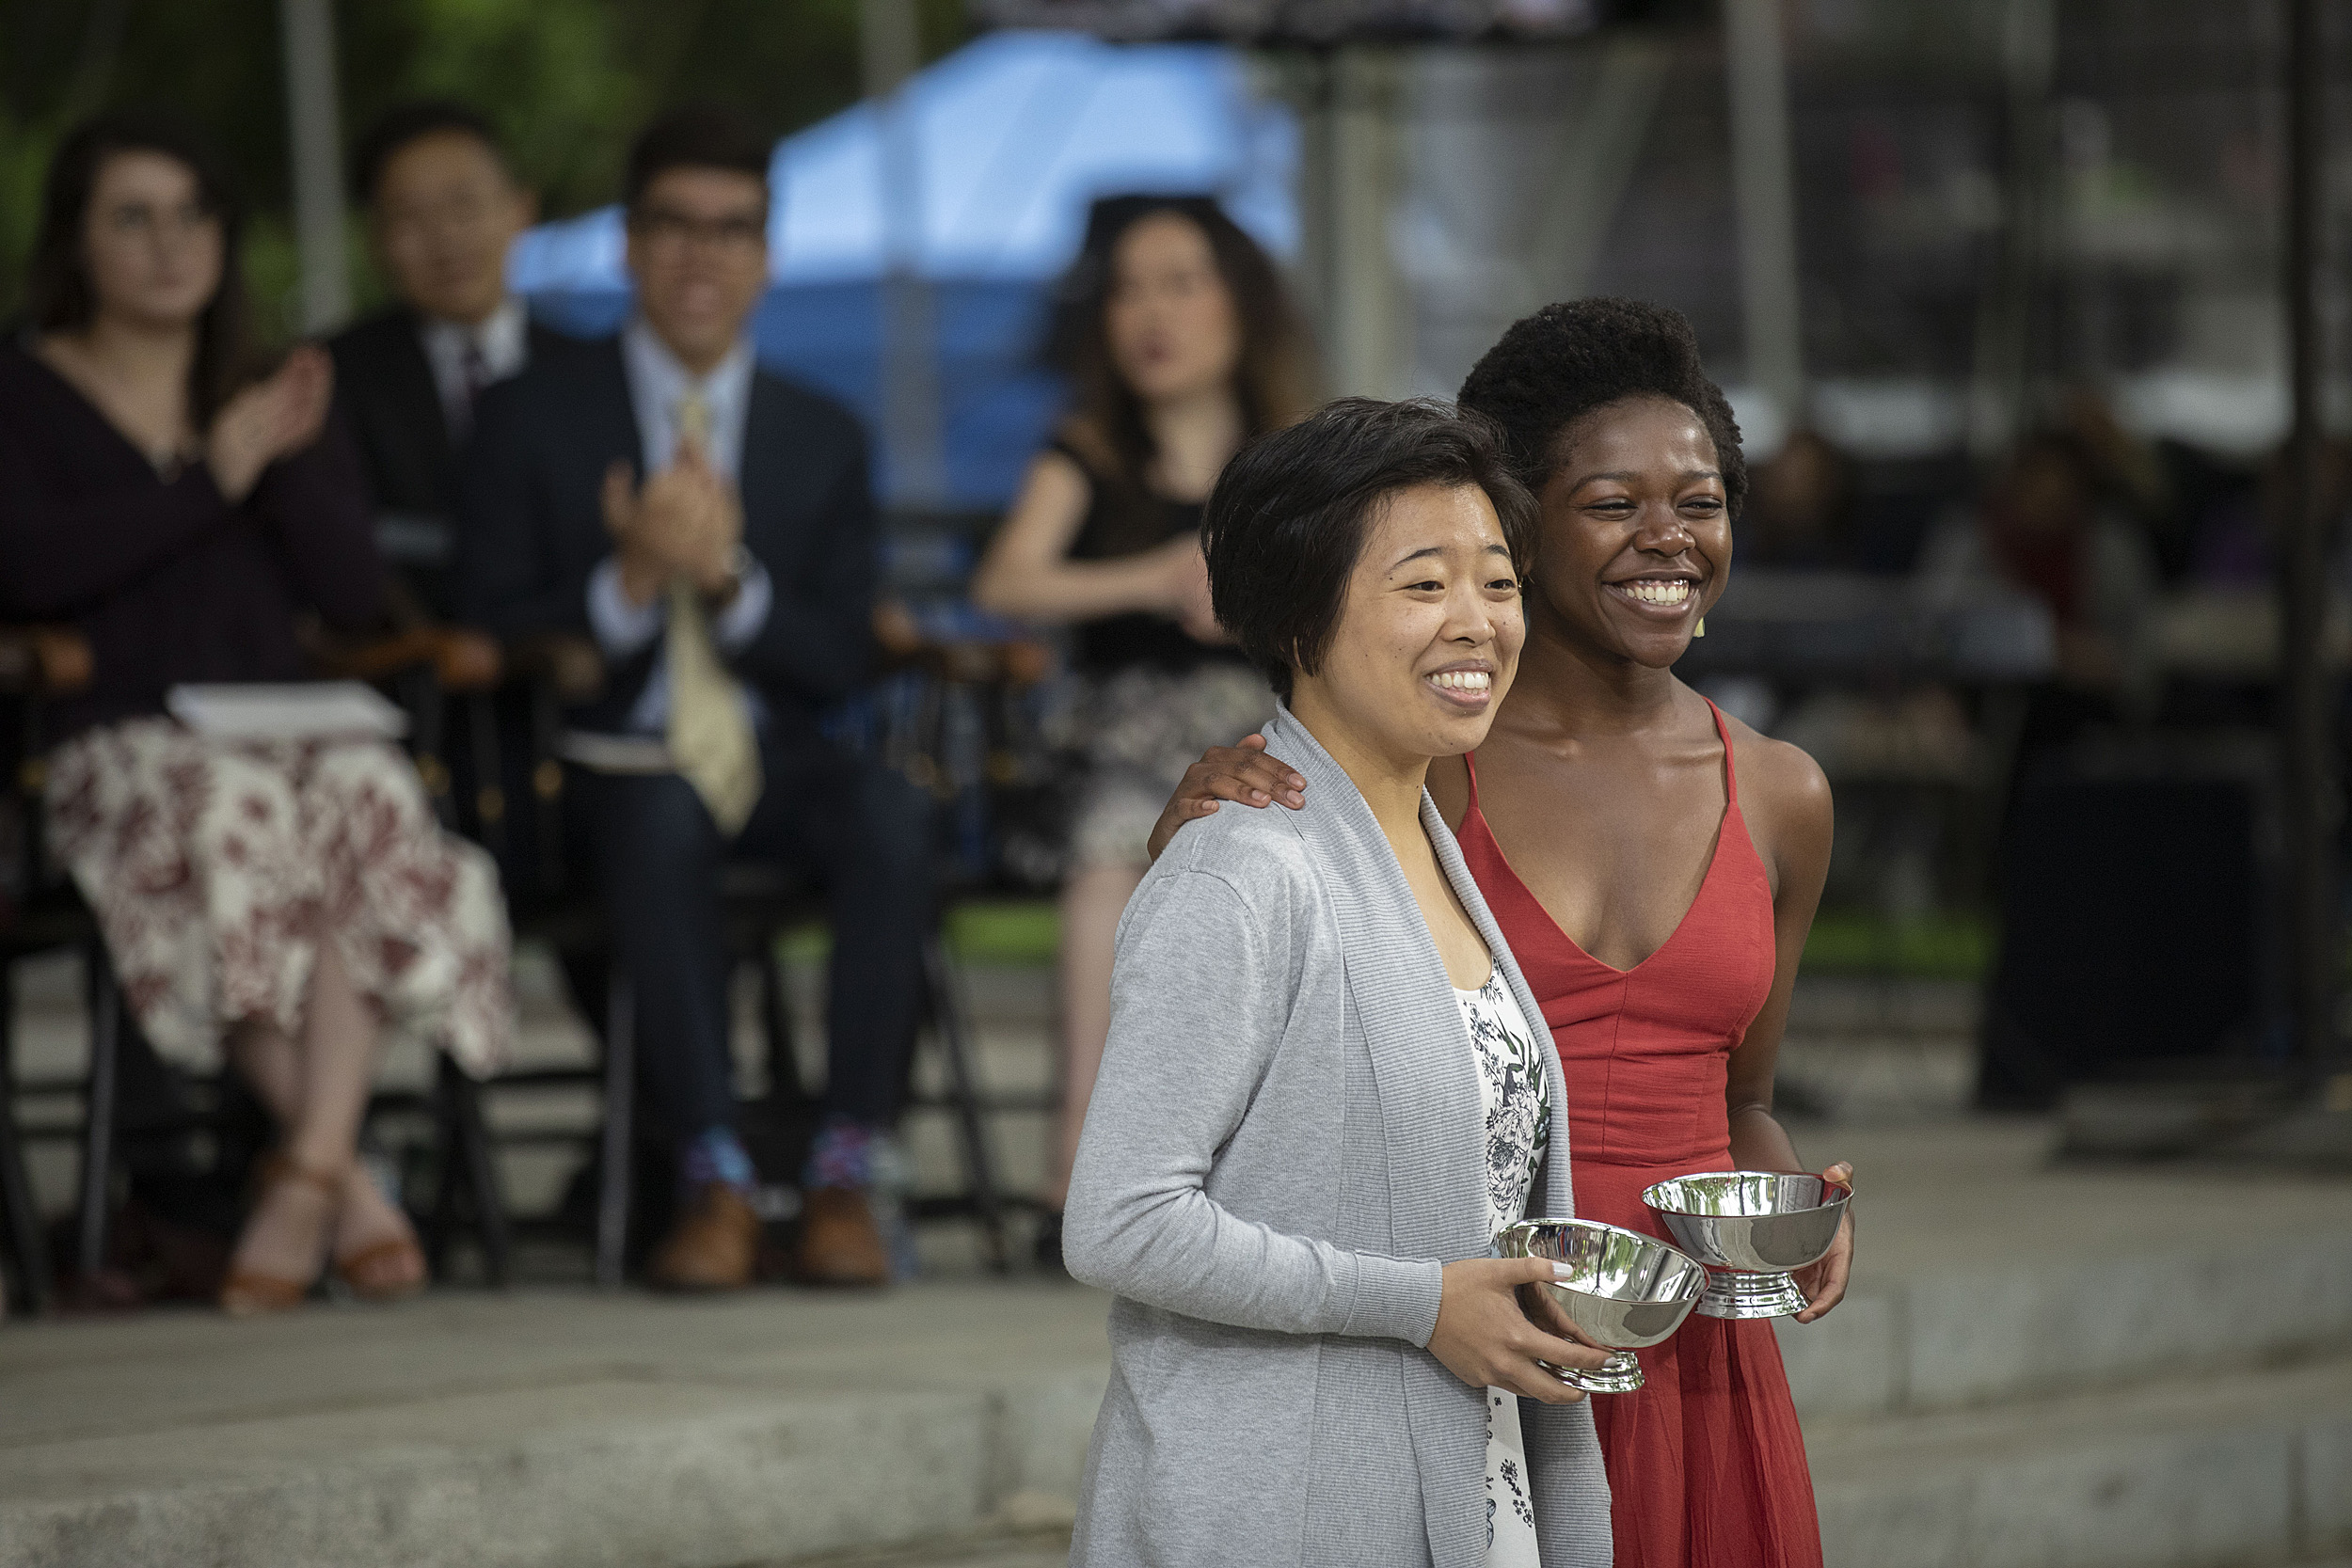 Sally Chen (left) and Jessica Ekeya pose with their awards